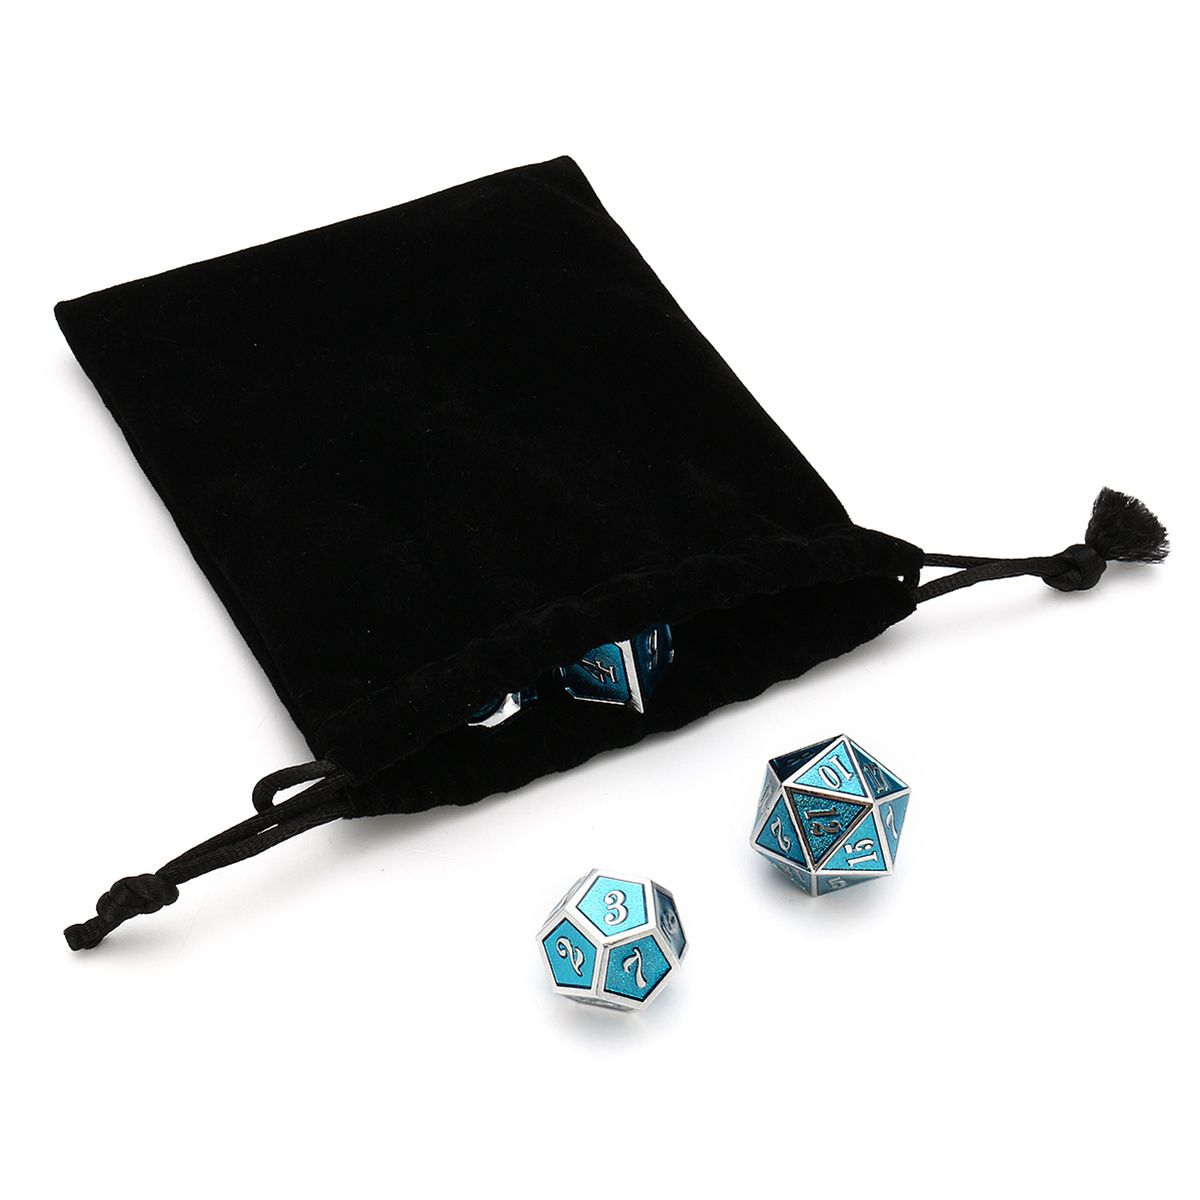 7pcs-Zinc-Alloy-Multisided-Dices-Set-Enamel-Embossed-Heavy-Metal-Polyhedral-Dice-With-Bag-1272100